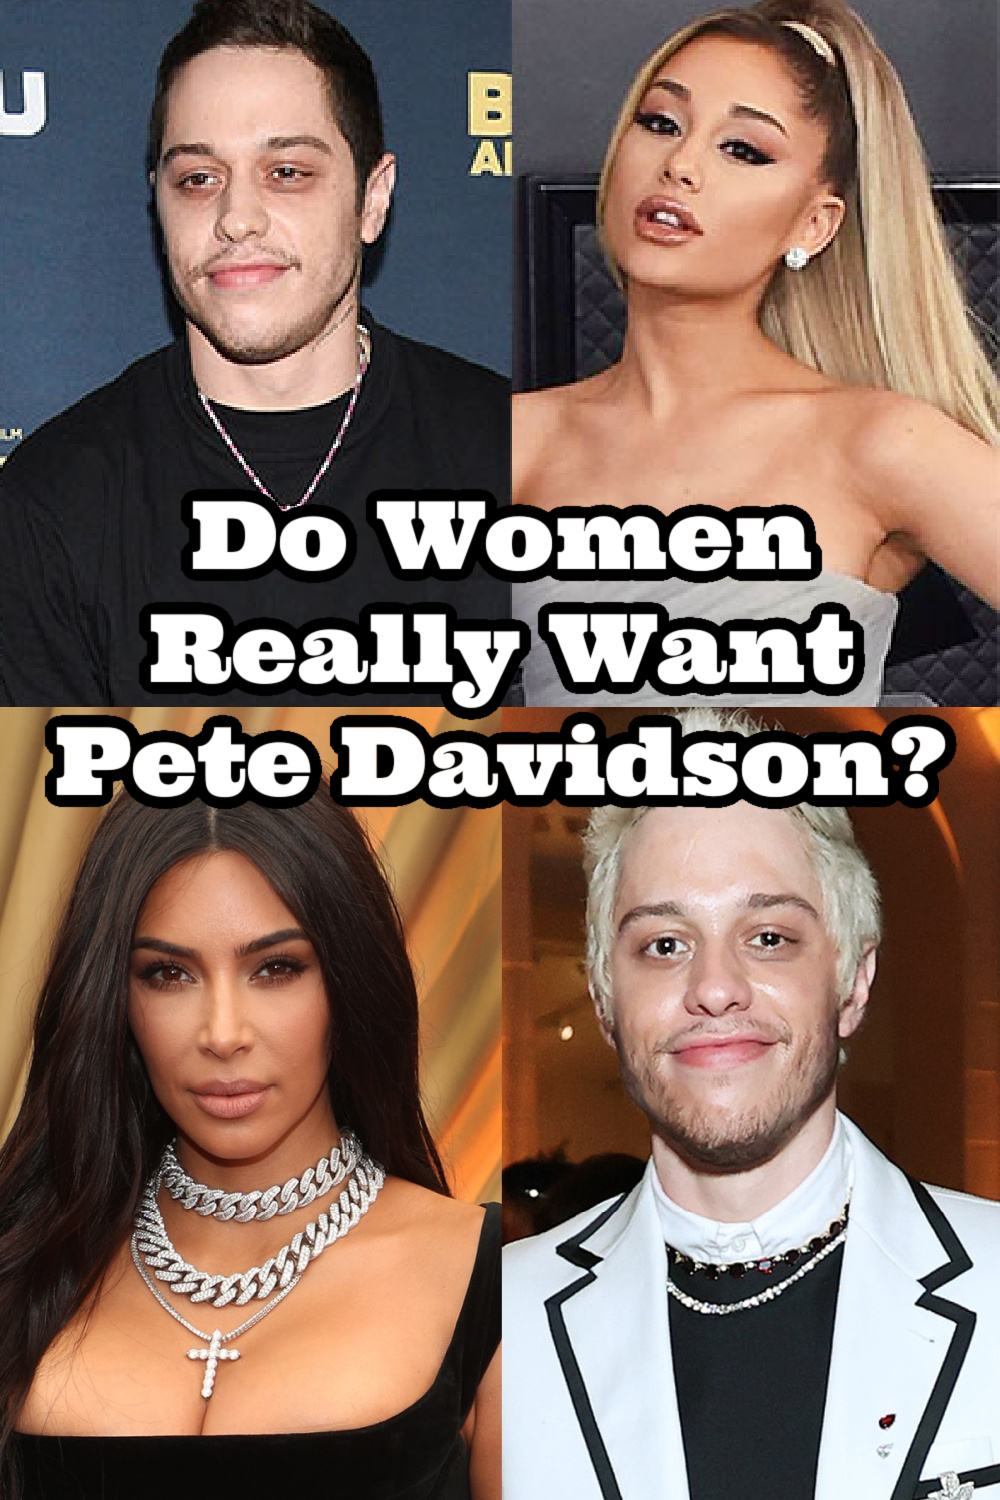 do women really want pete davidson, what do women see in pete davidson, why women want pete davidson, do funny guys get laid, do women really want the funny guy, why women find pete davidson attractive, do funny guys get women, is stand up comedy masculine or feminine, understanding masculine and feminine energy, sexual polarity, creating sexual polarity, sexual polarity in relationships, sexual polarity, sexual polarity masculine feminine, Everyday starlet, sarah blodgett,